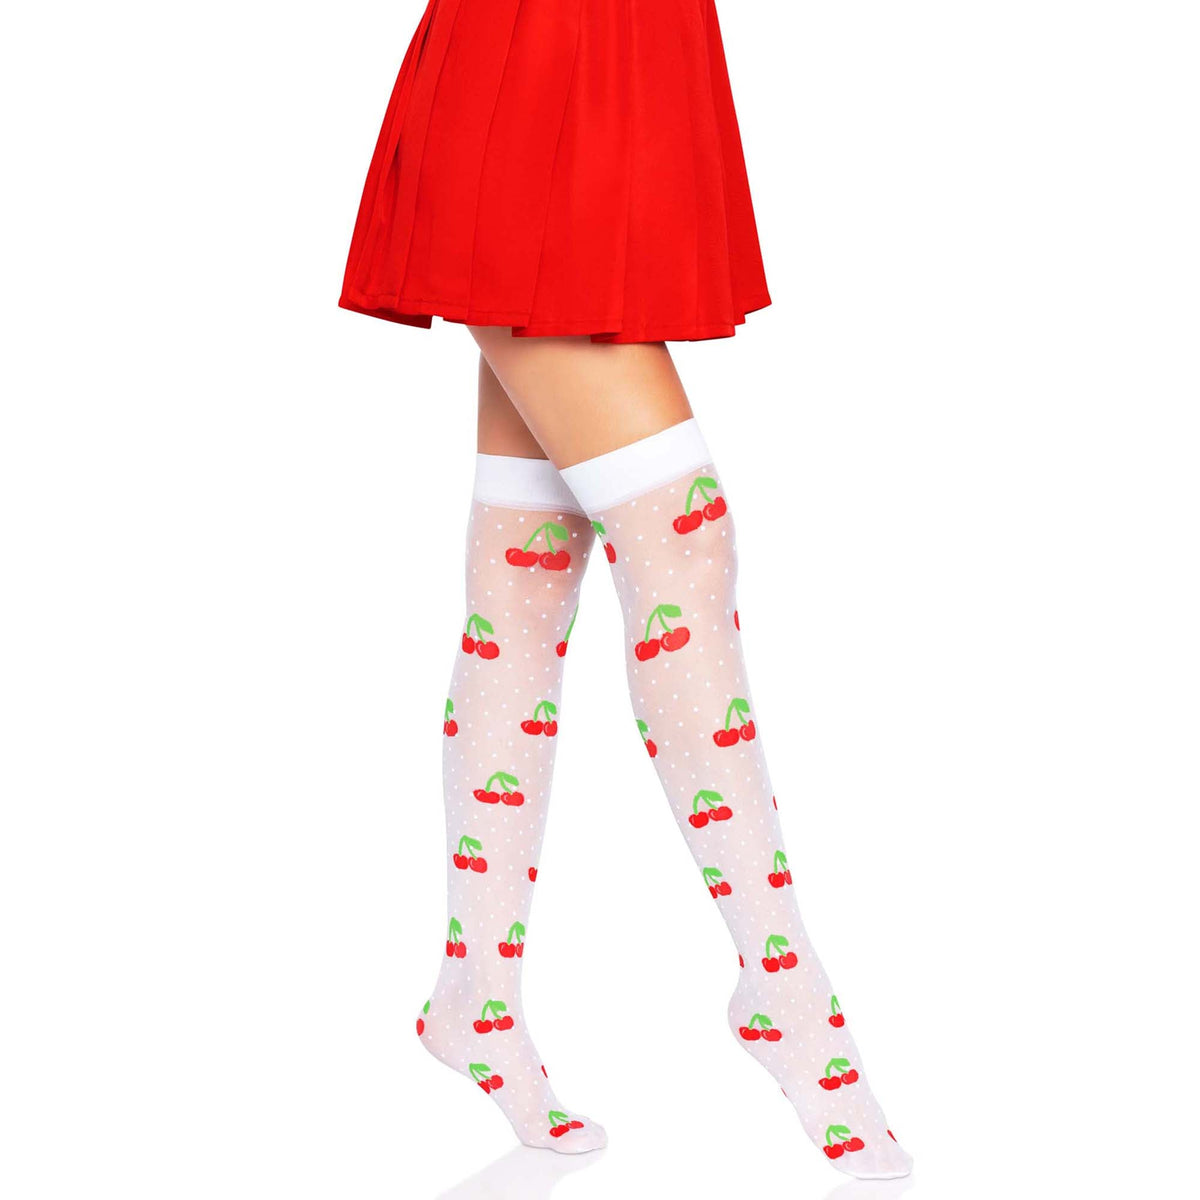 LEG AVENUE/SKU DISTRIBUTORS INC Costume Accessories White Cherry Thigh-High Tights for Adults, 1 Count 714718565798